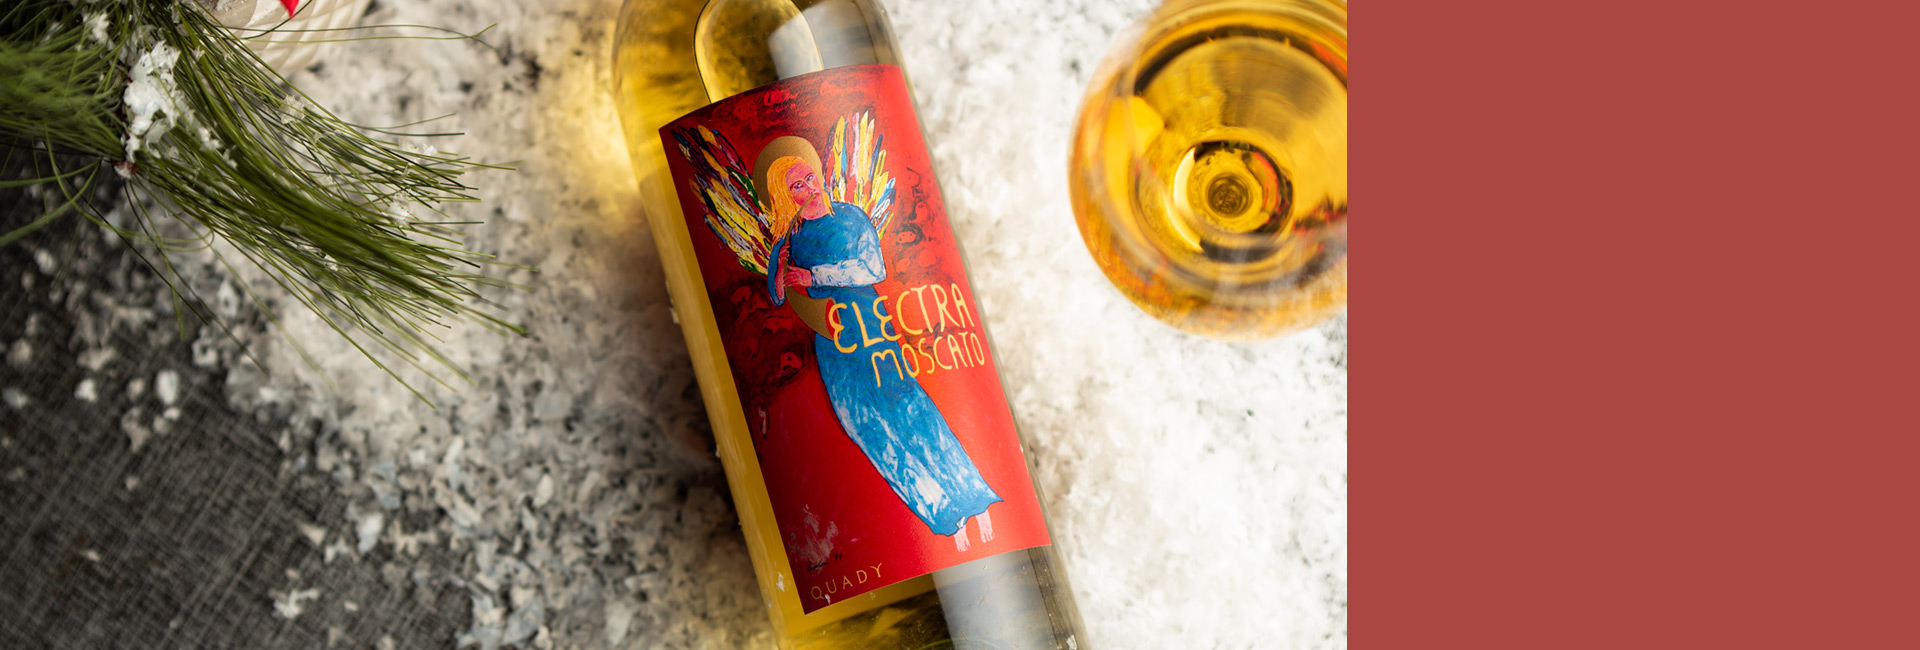 Holiday wine sale home page banner with a bottle of Electra Moscato lying on a table in snow with a filled wine glass next to it.